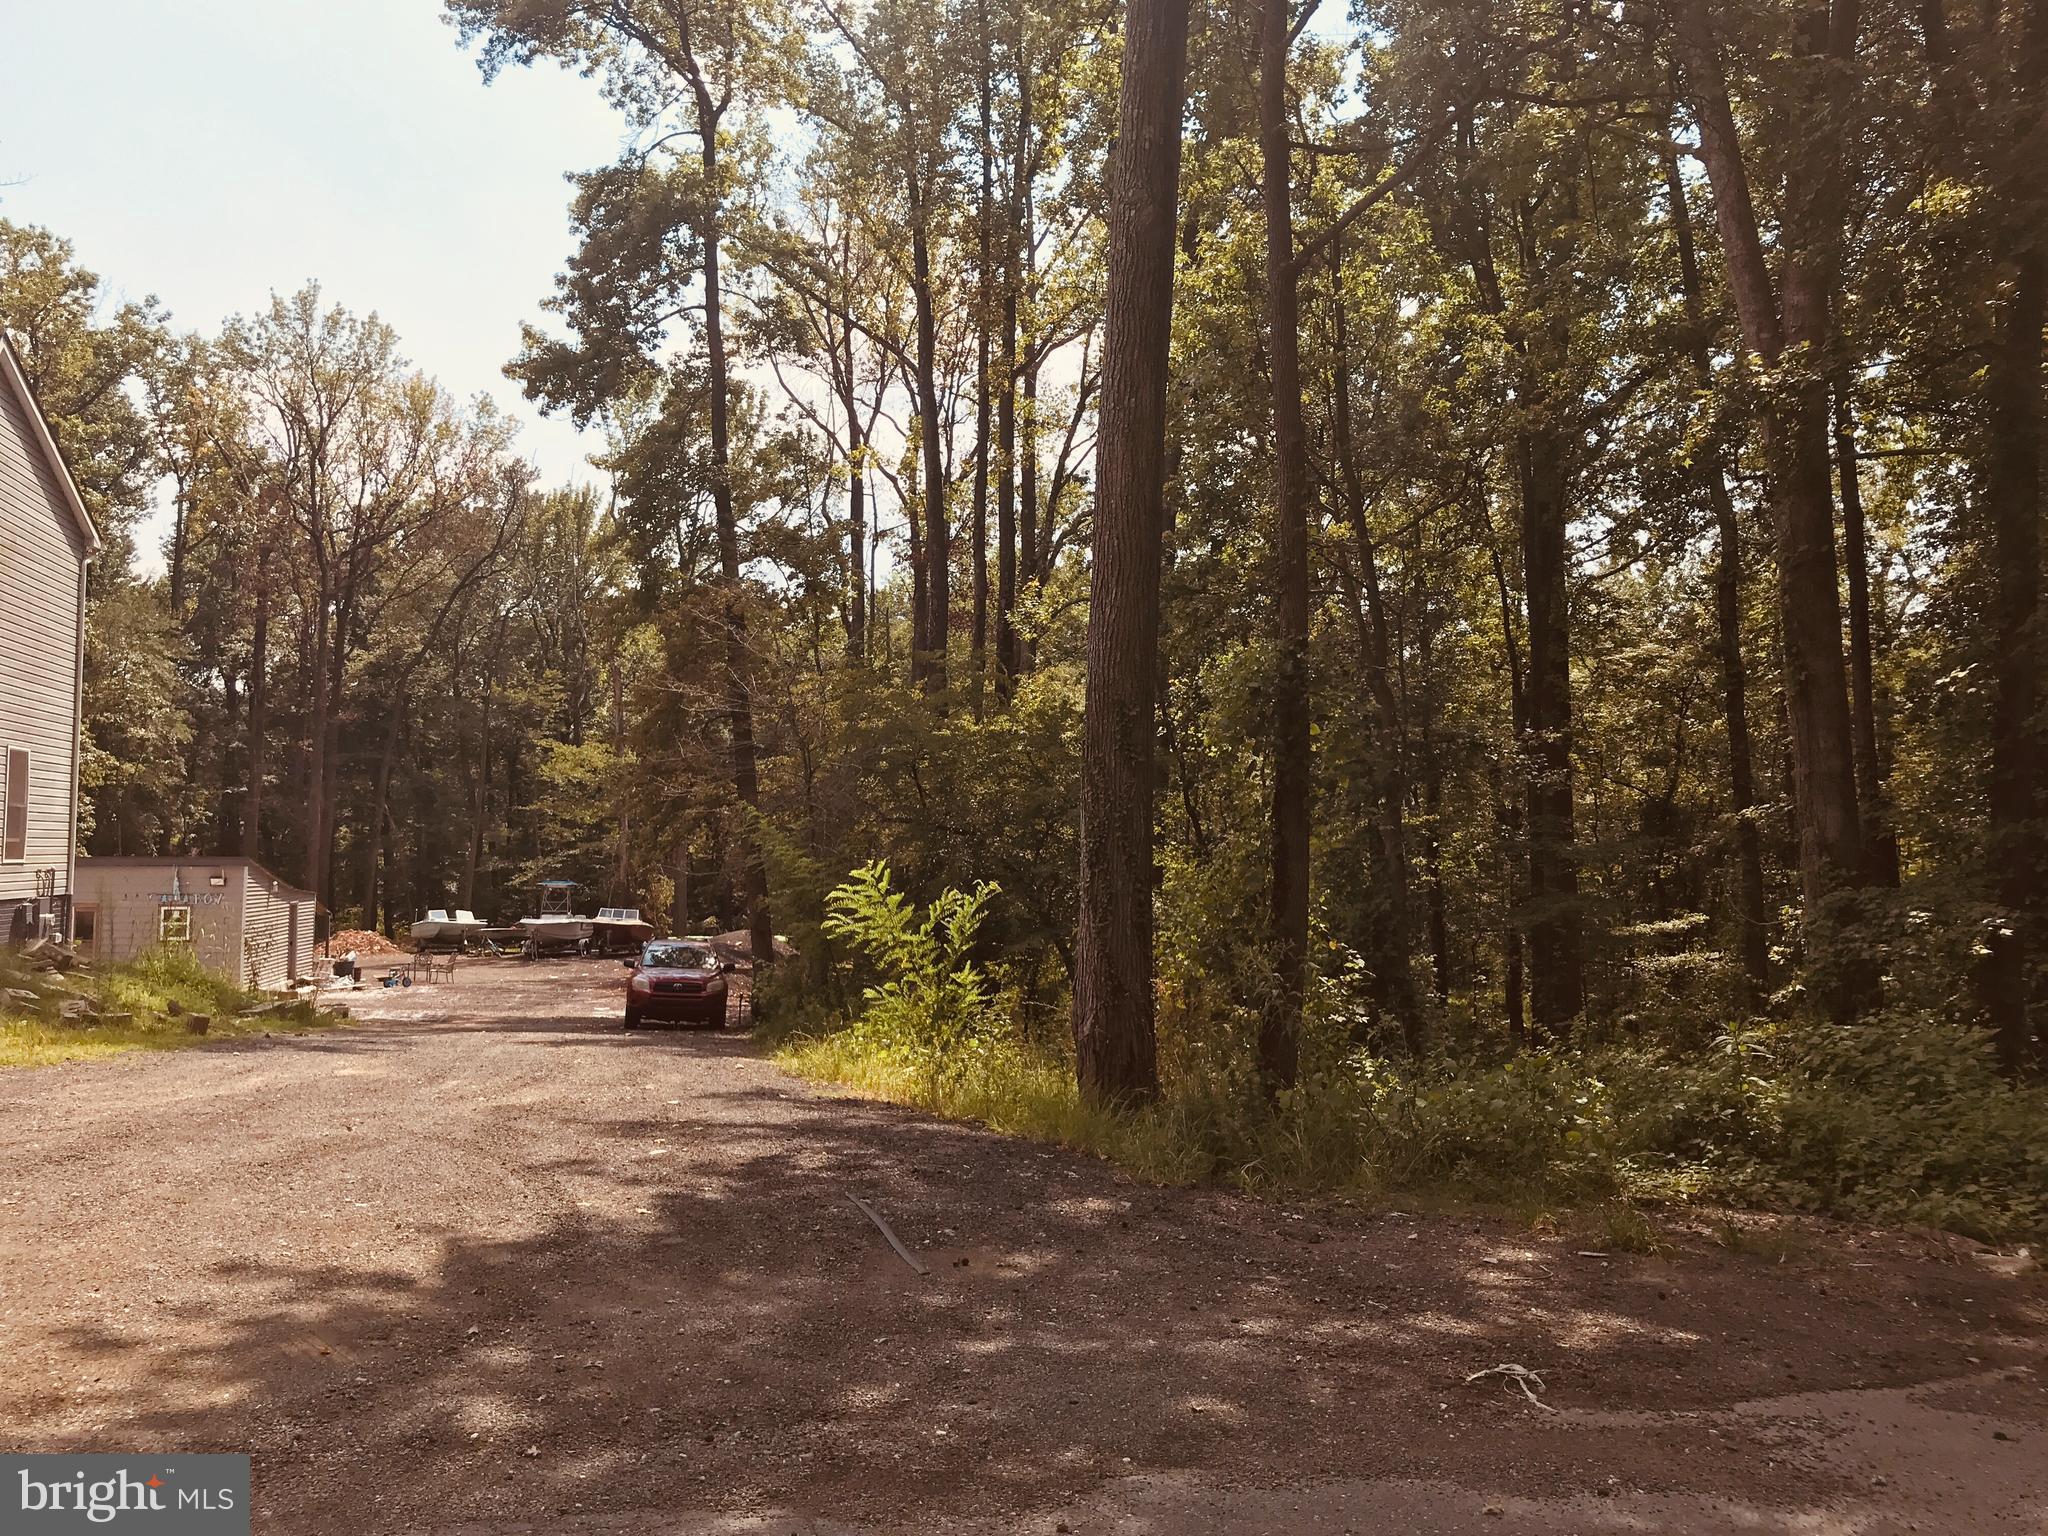 a view of road with trees